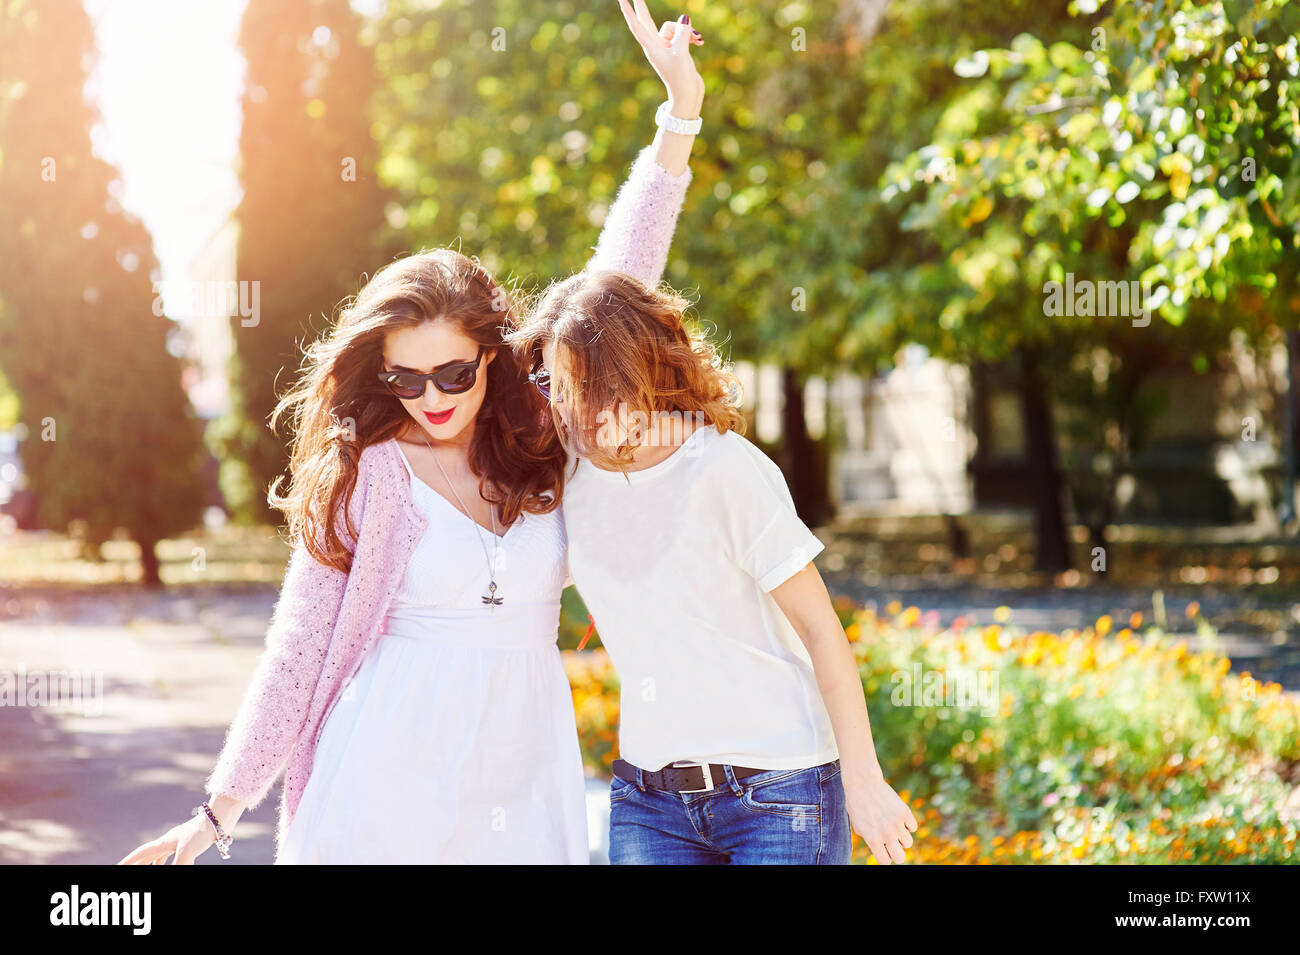 Two young happy women walking in the summer city Stock Photo